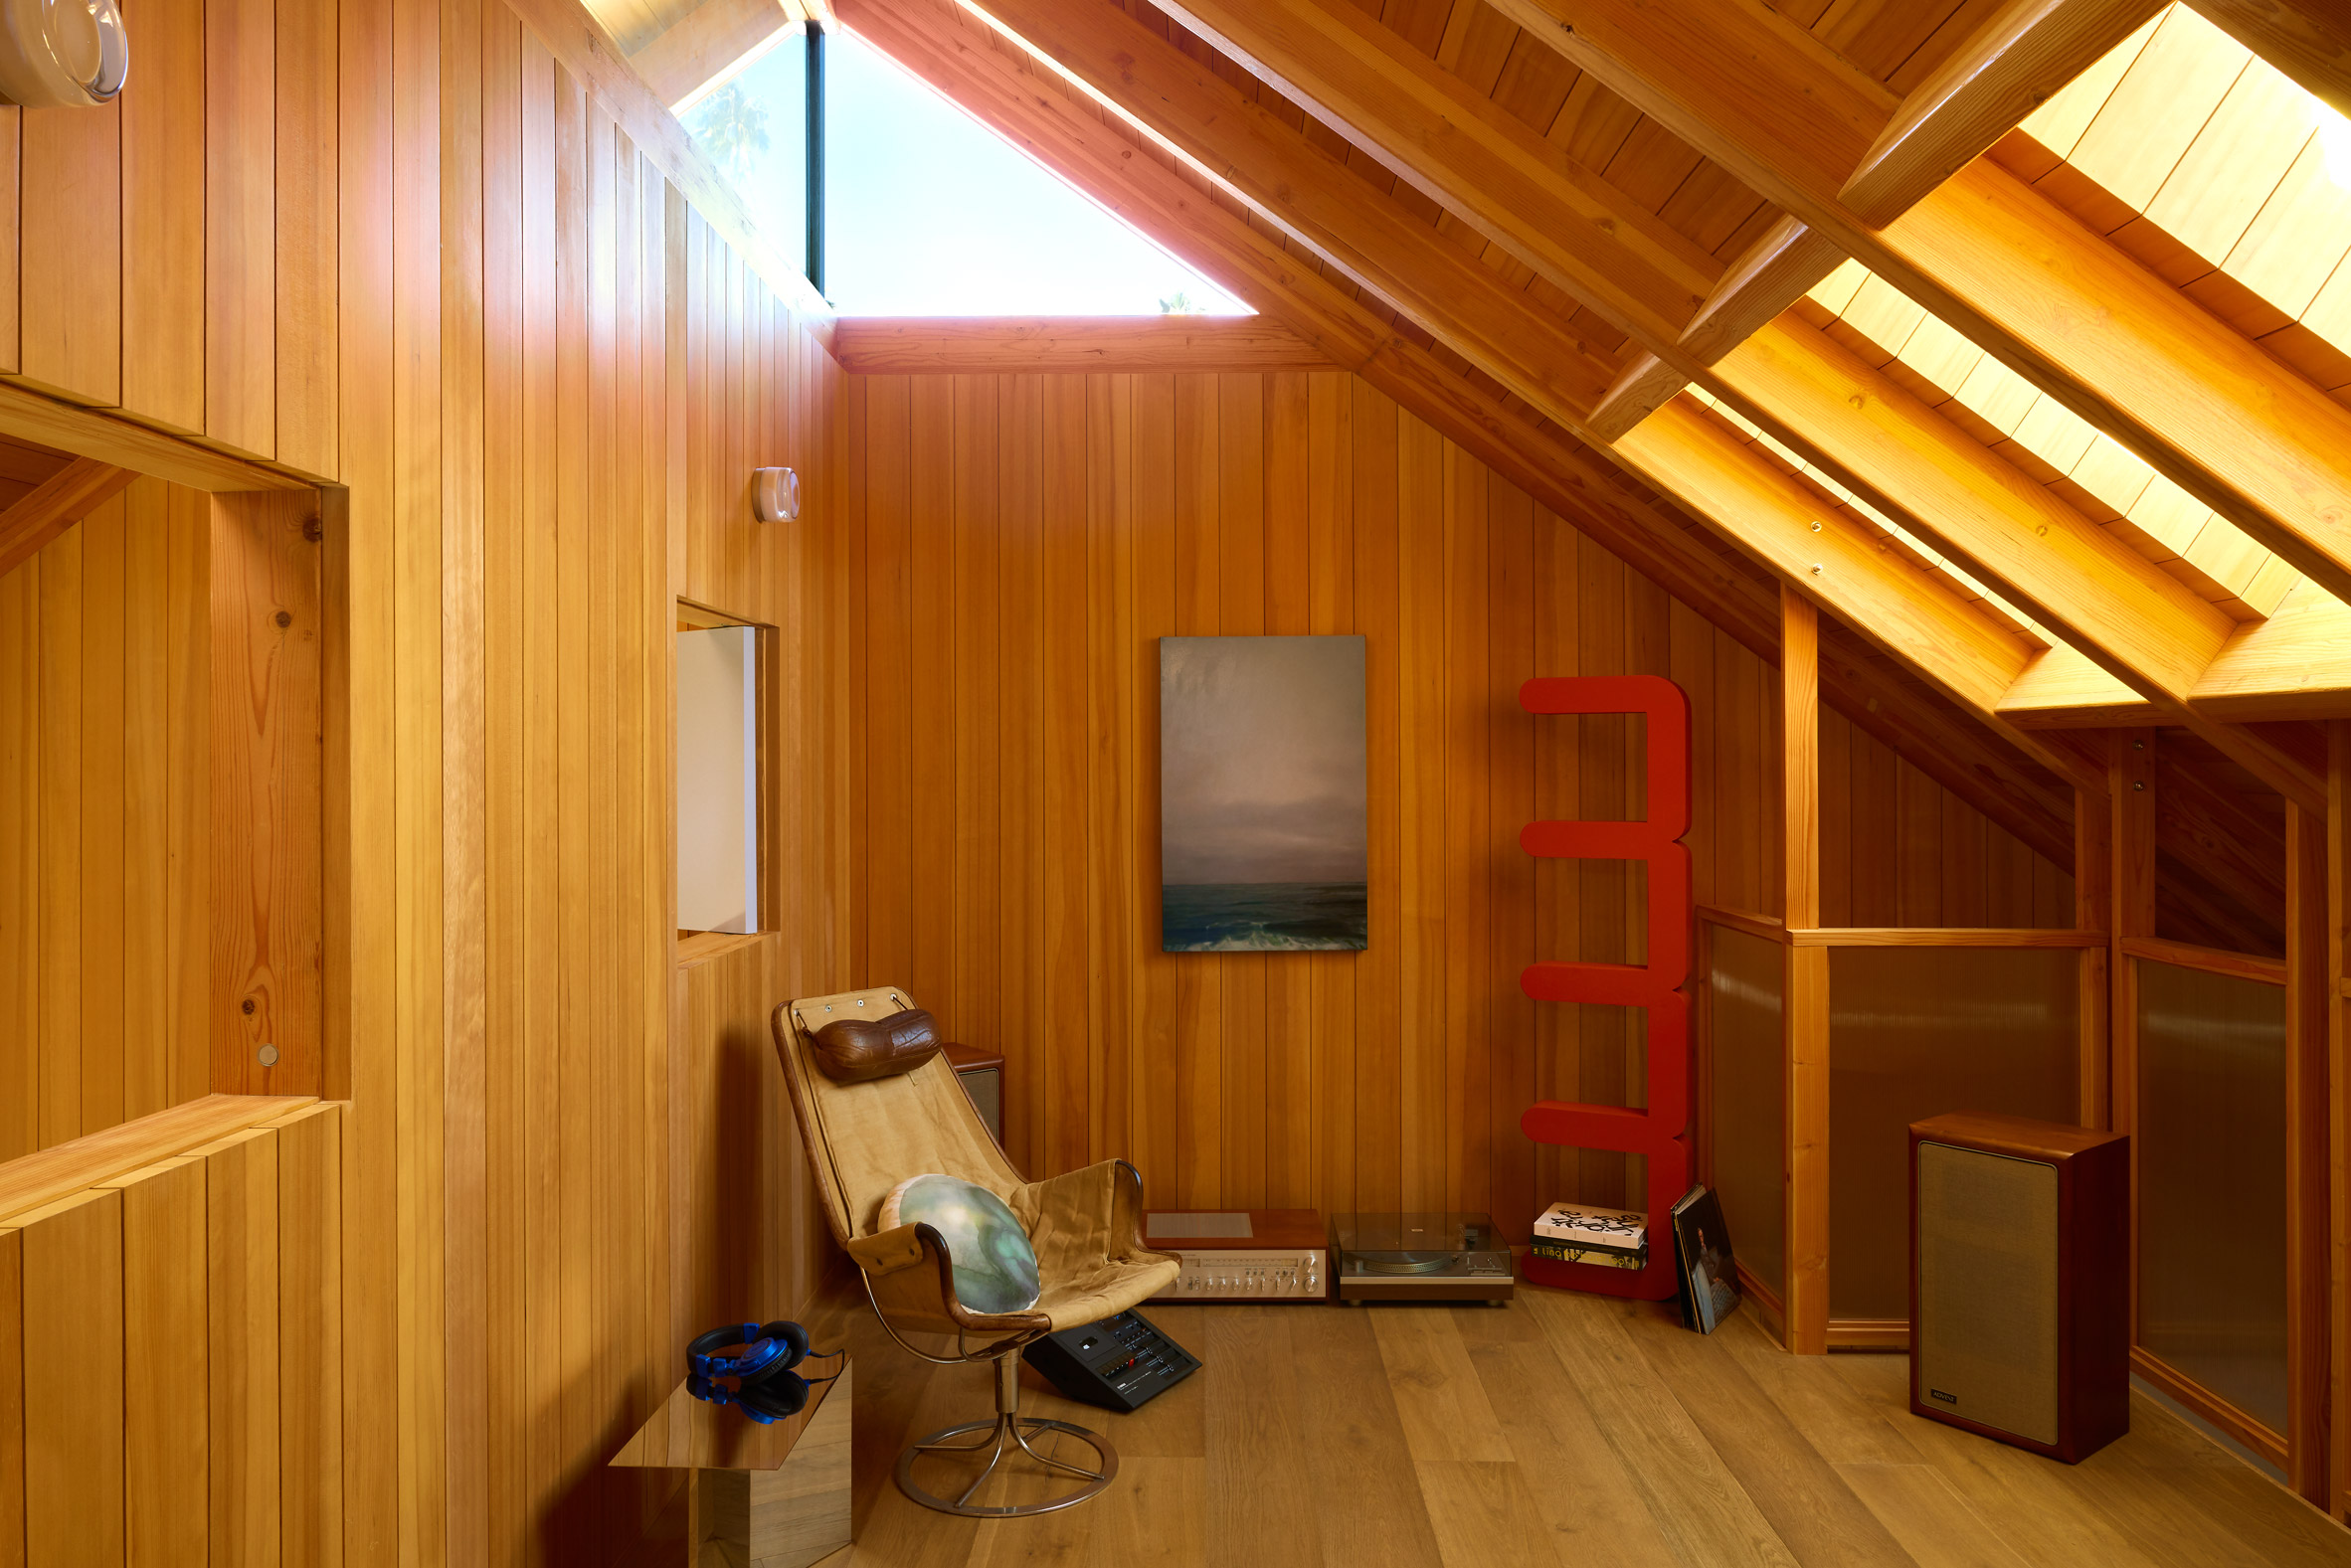 Hemlock-clad room within gabled main dwelling of B+B House